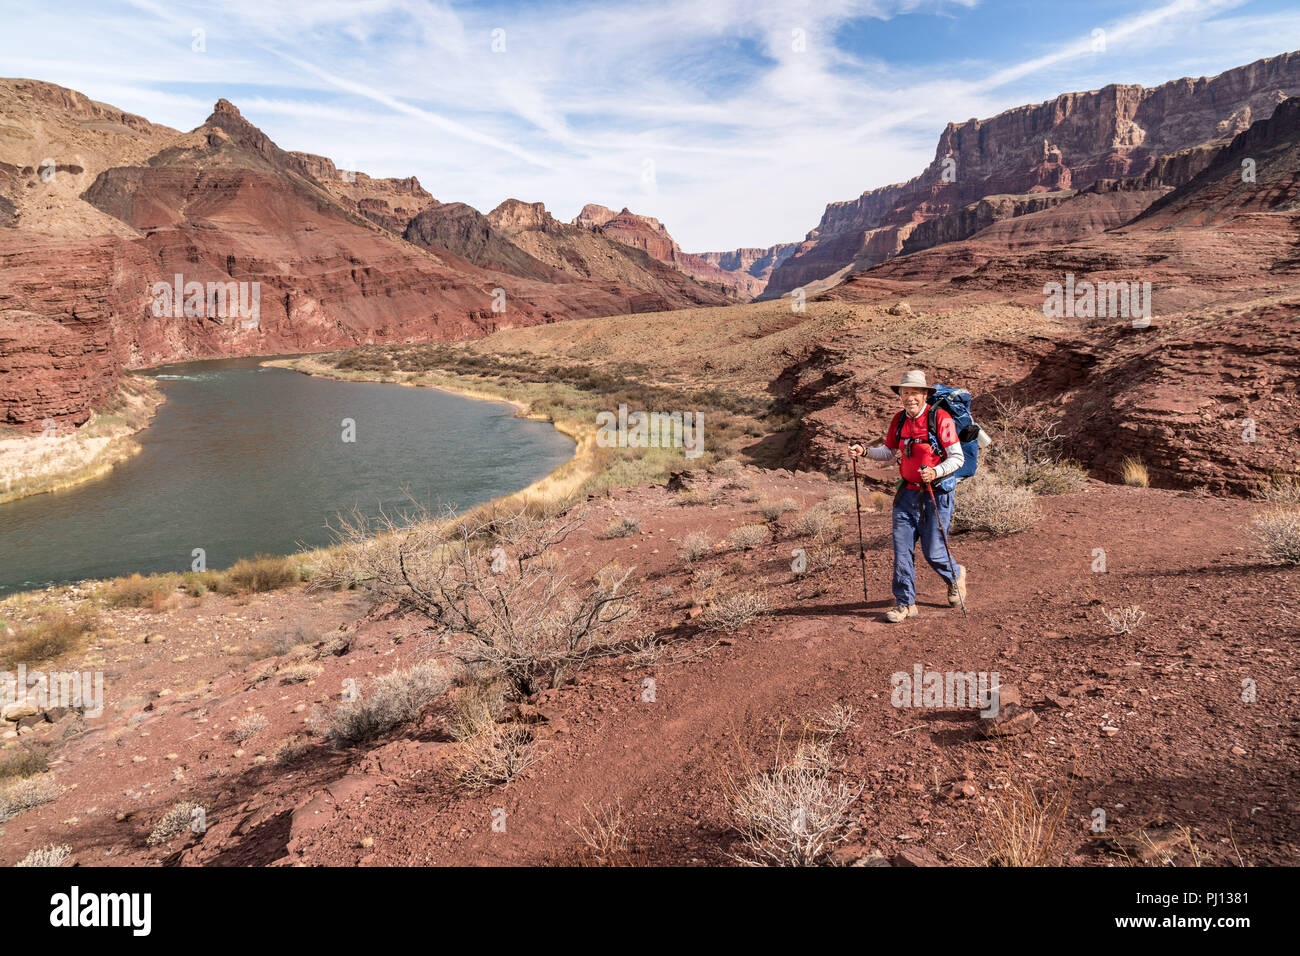 Hiking The Beamer Trail in the Grand Canyon National Park with view of the Colorado River Stock Photo